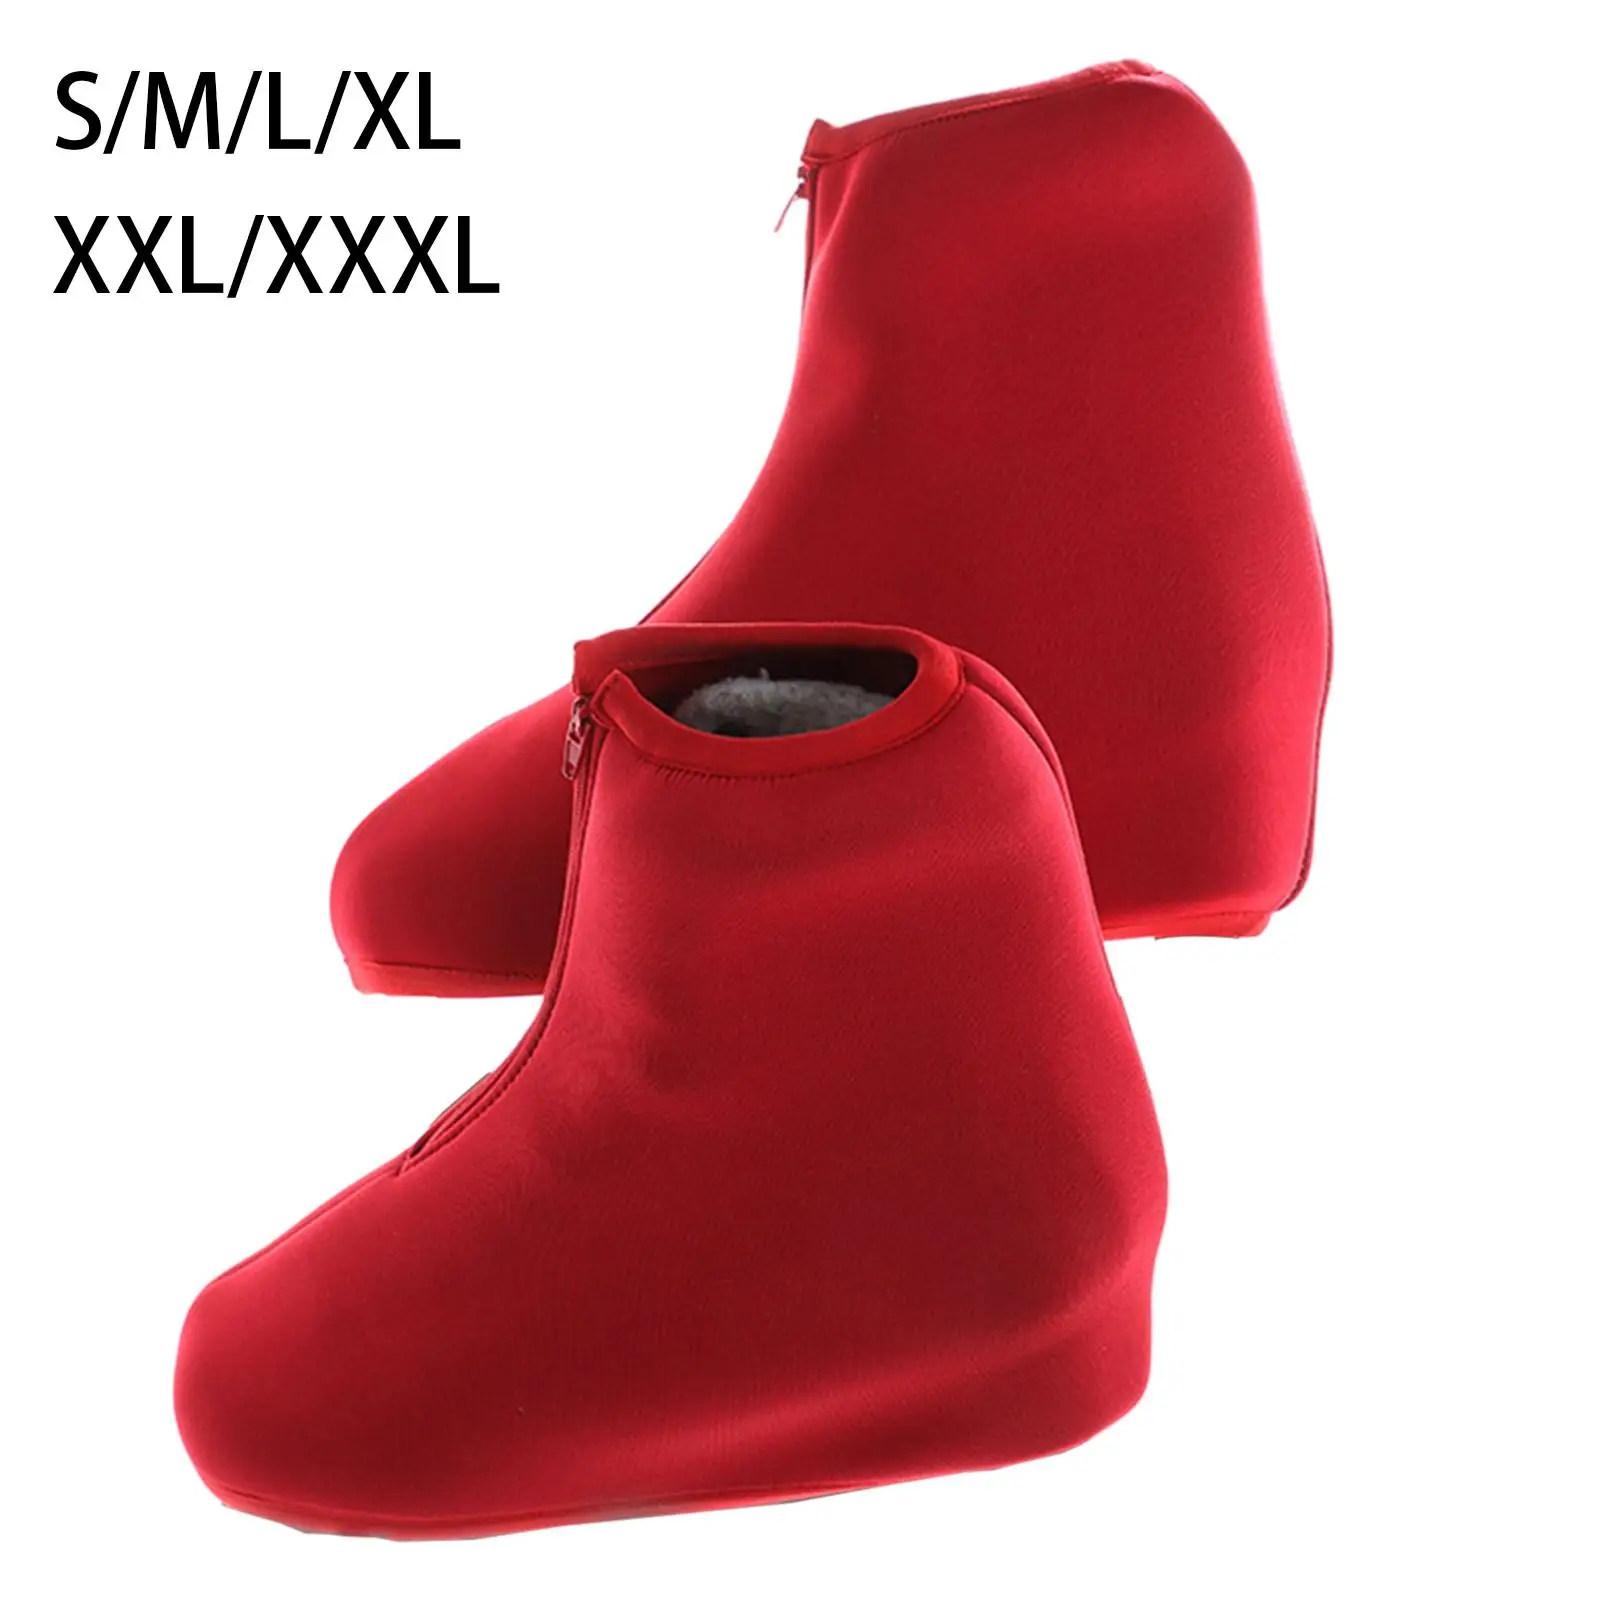 1 Pair Skate Boot Covers Winter Sports Supplies Overshoes Skating Boot Covers Adult Protective for Roller Skates Figure Skates